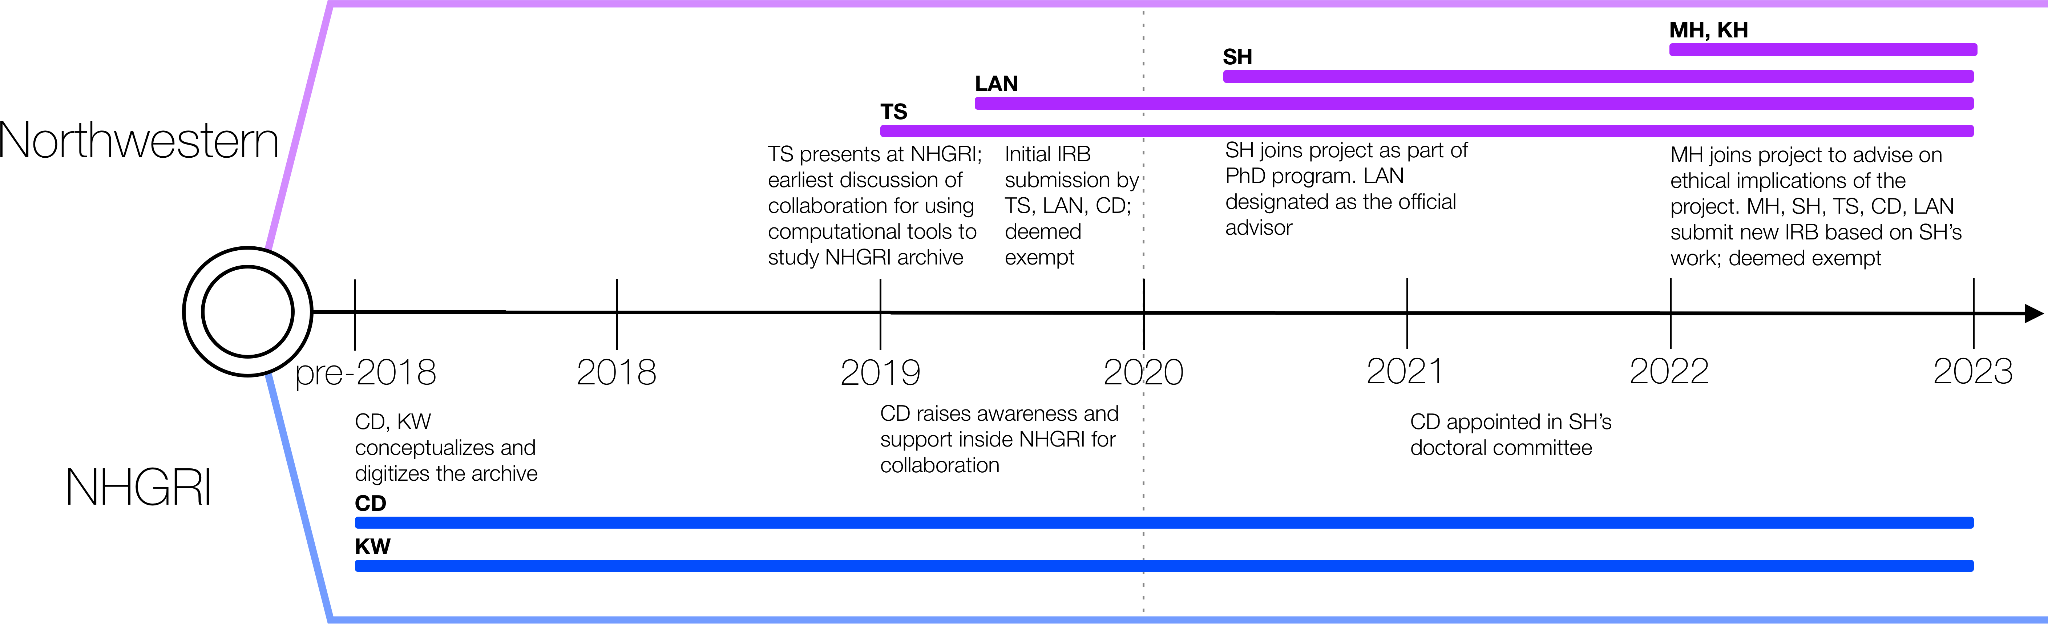 Graphic showing a timeline from 2018 to 2023 of collaboration between the History of Genomics program of National Human Genome Research Institute (NHGRI) and Northwestern University’s Amaral Lab and Galter Health Sciences Library, including initials of project team members.